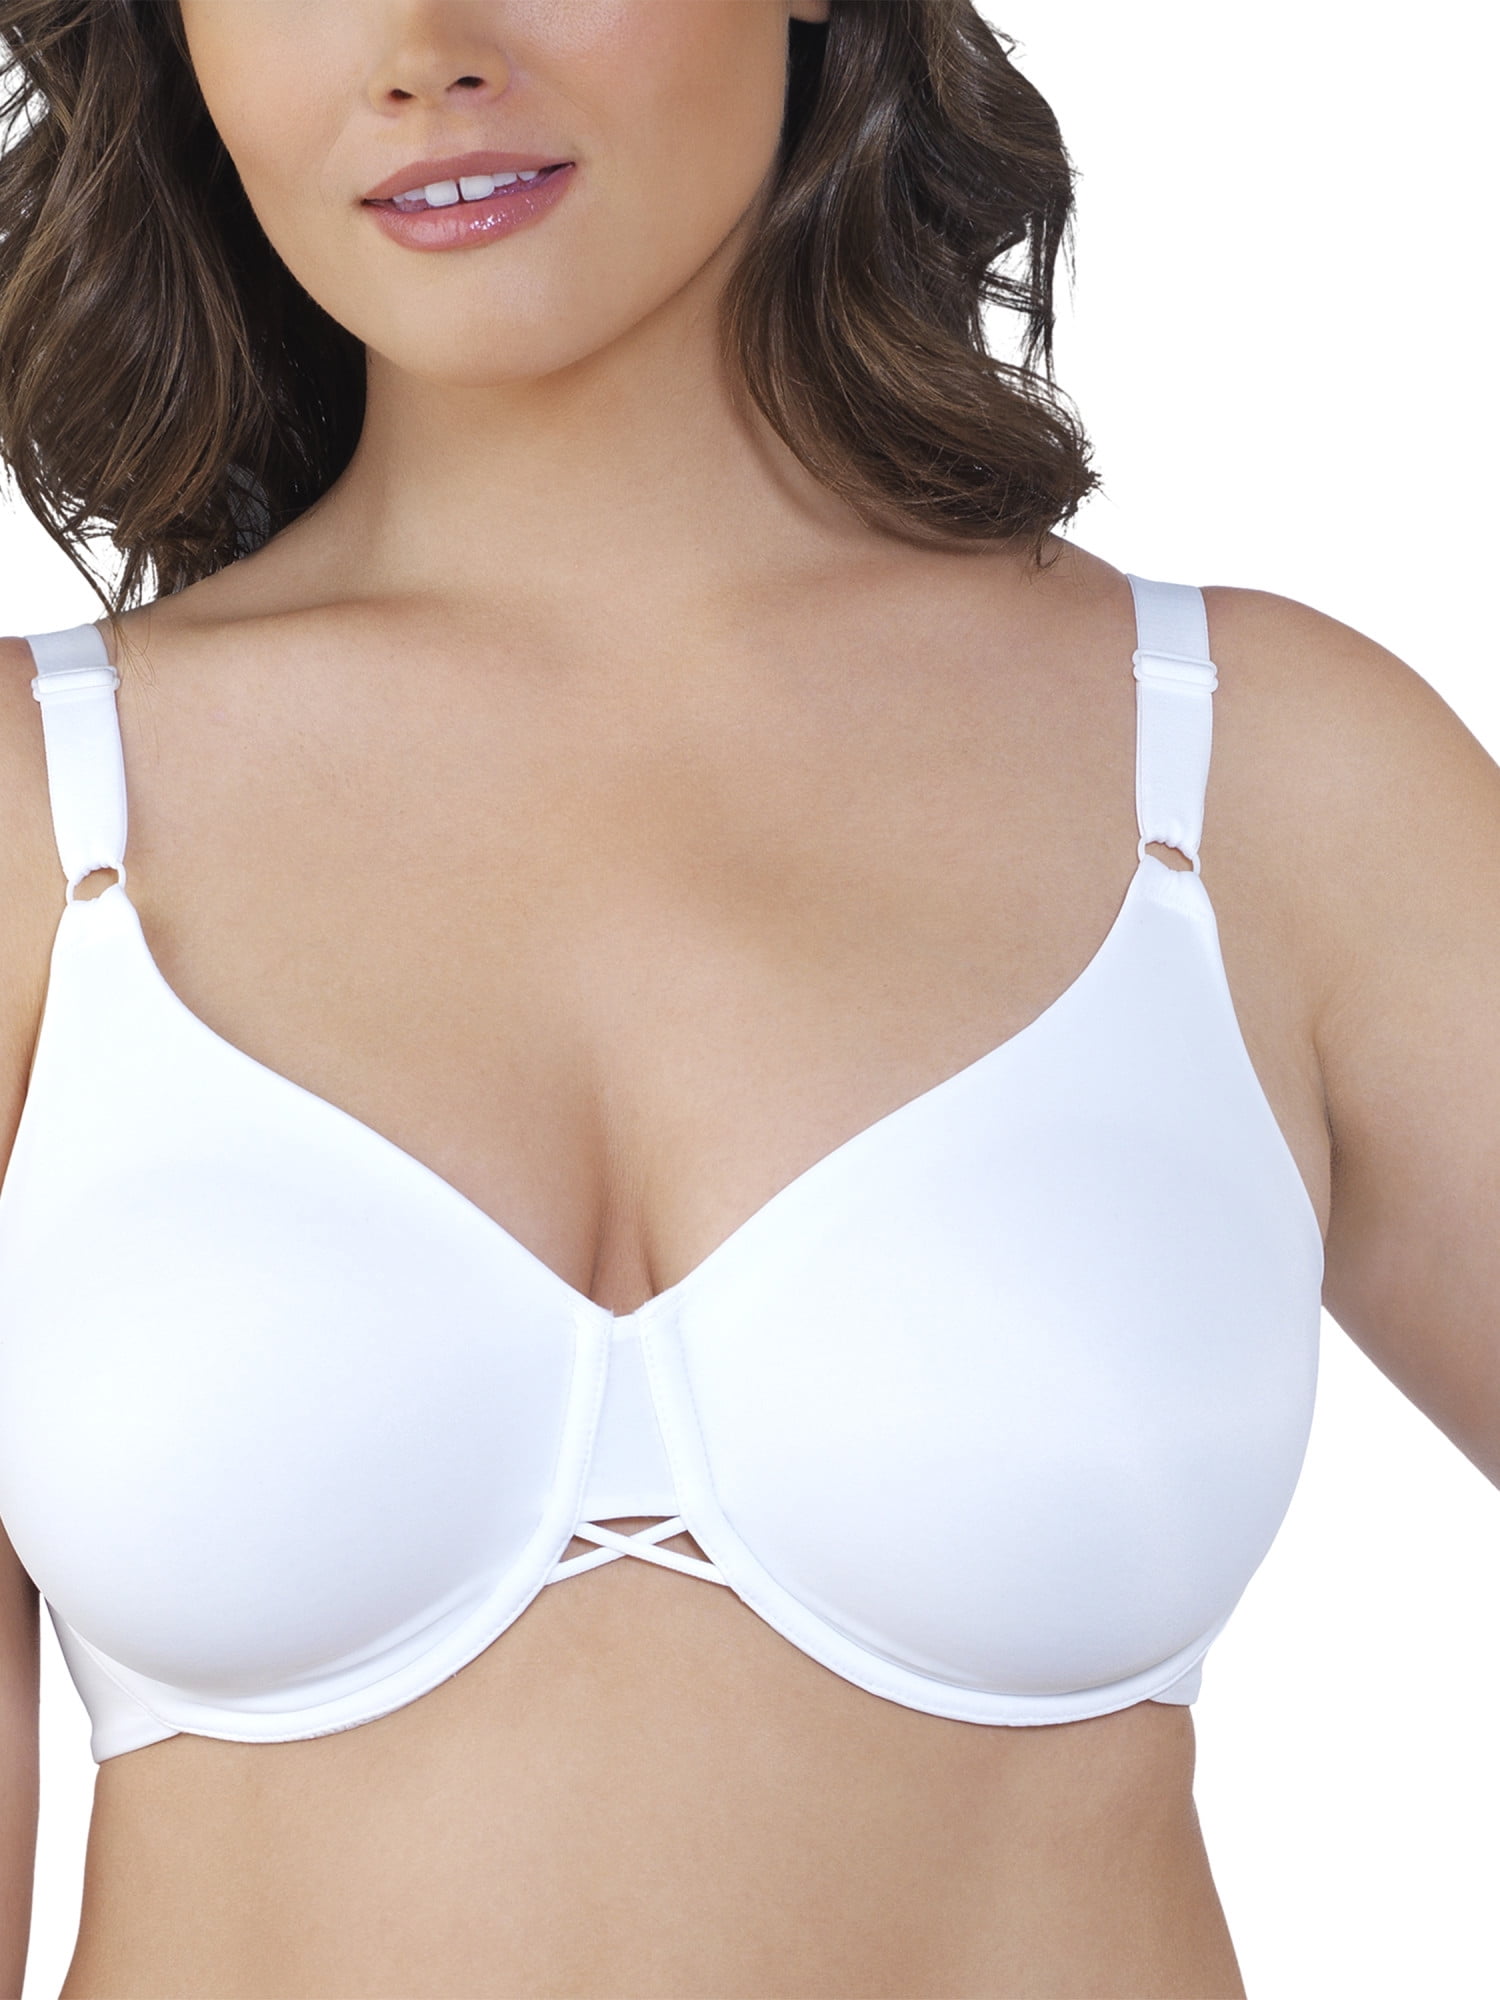 Curvation 38DD on tag Sister Sizes: 36E, 40D Thin Pads